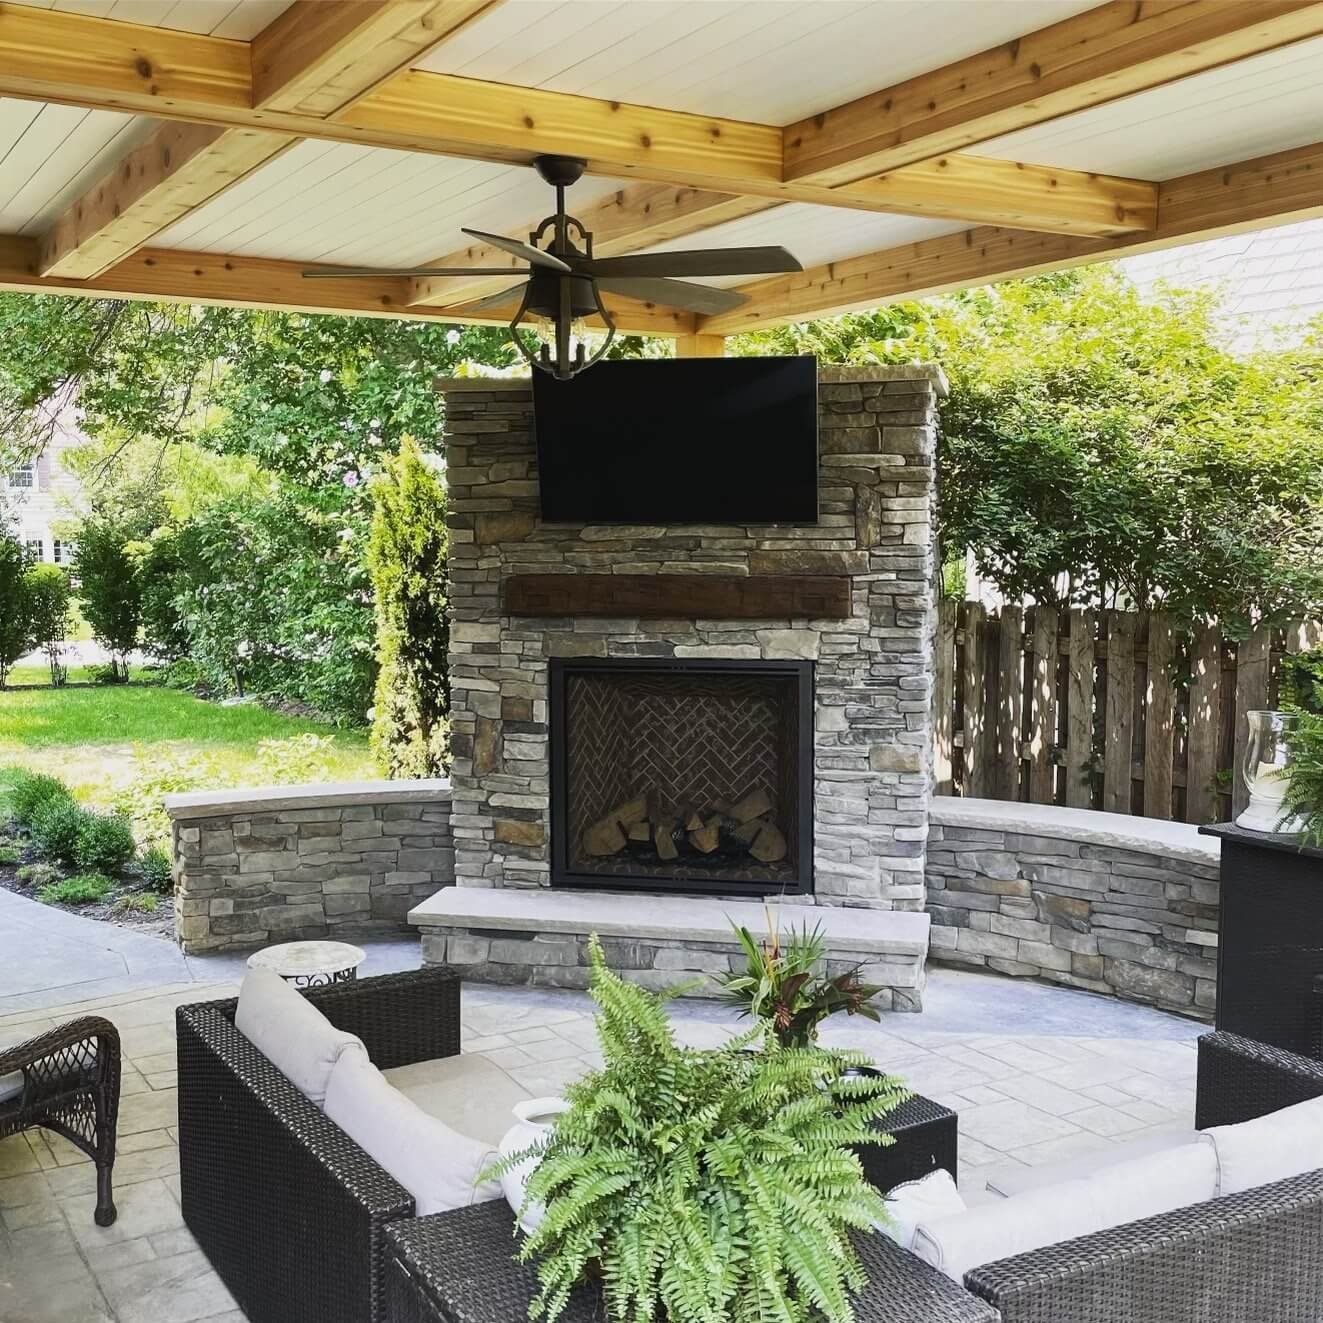 Outdoor Kitchen and Fireplace Designs